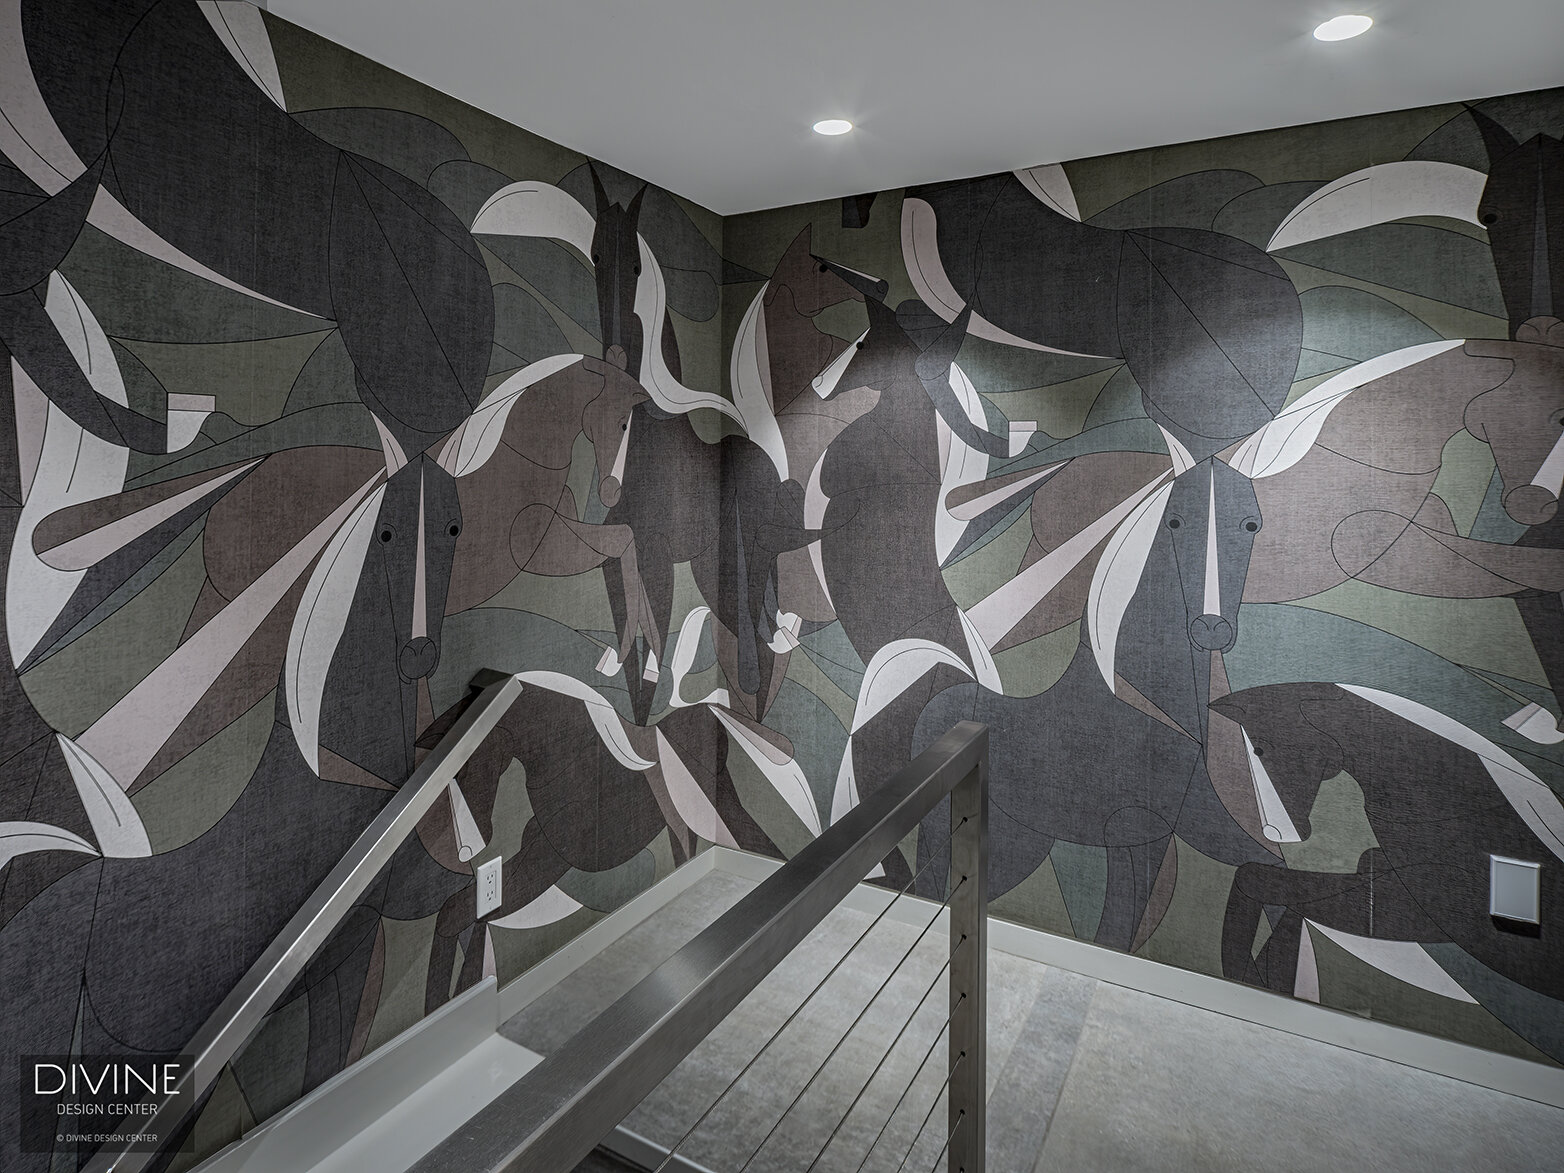  Modern wallpaper in dark charcoals, soft greens, and poignant whites by London Art wrap the hallway staircase. Overhead, recessed lighting and concrete floors finish the space.  